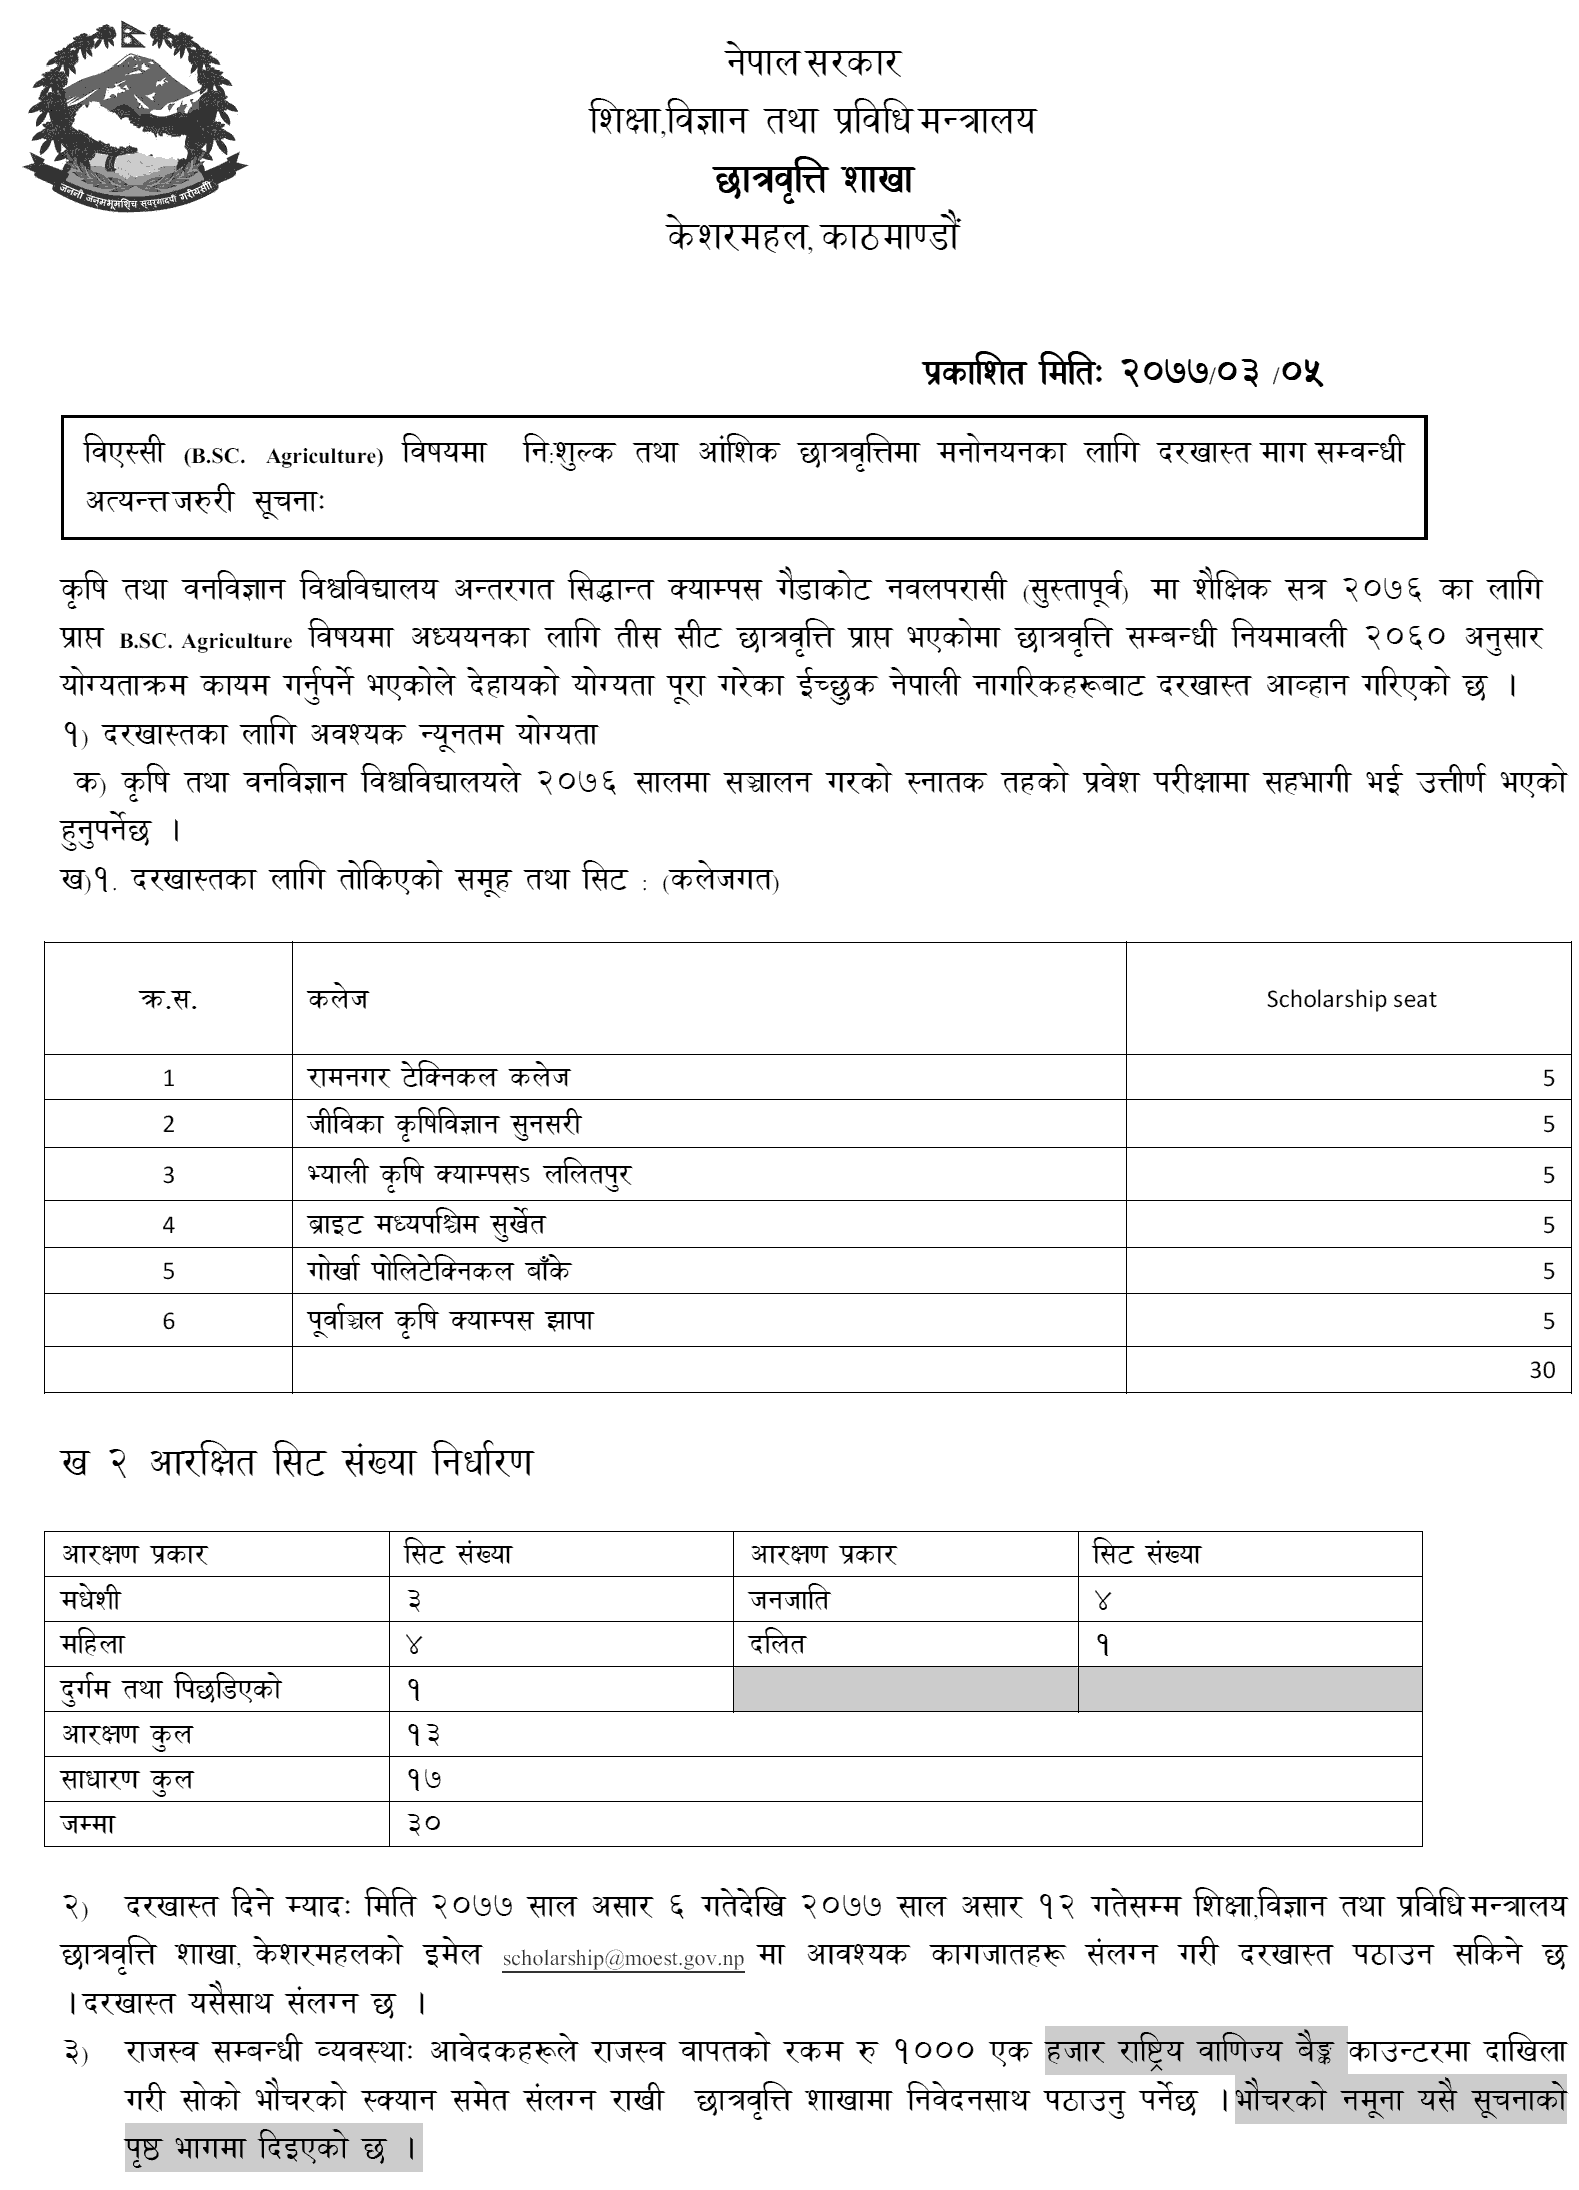 B.Sc Agriculture Free Scholarship from Government of Nepal